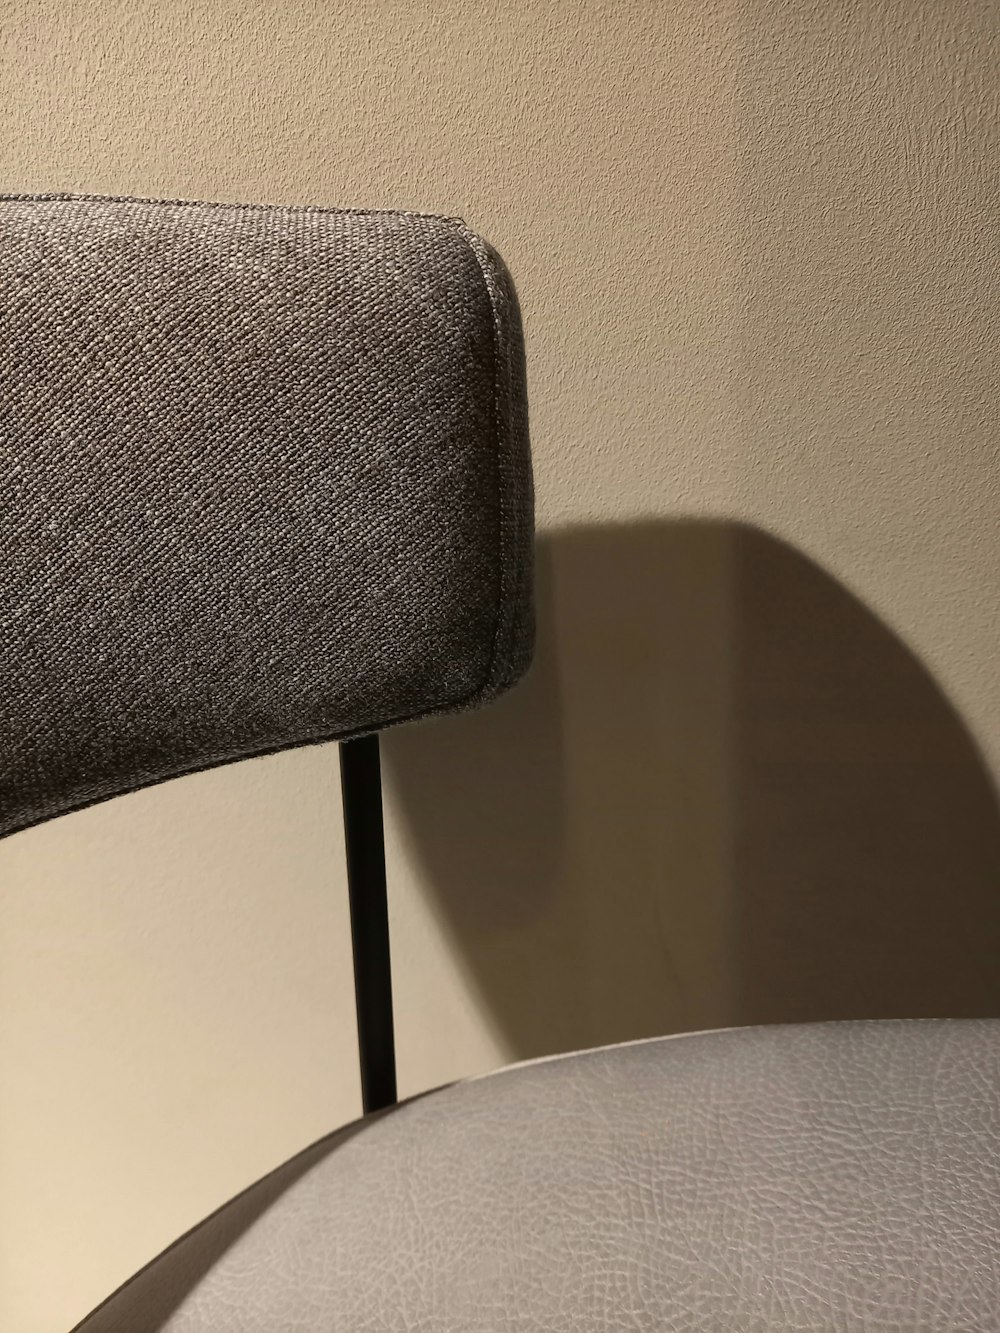 a close up of a chair with a shadow on the wall